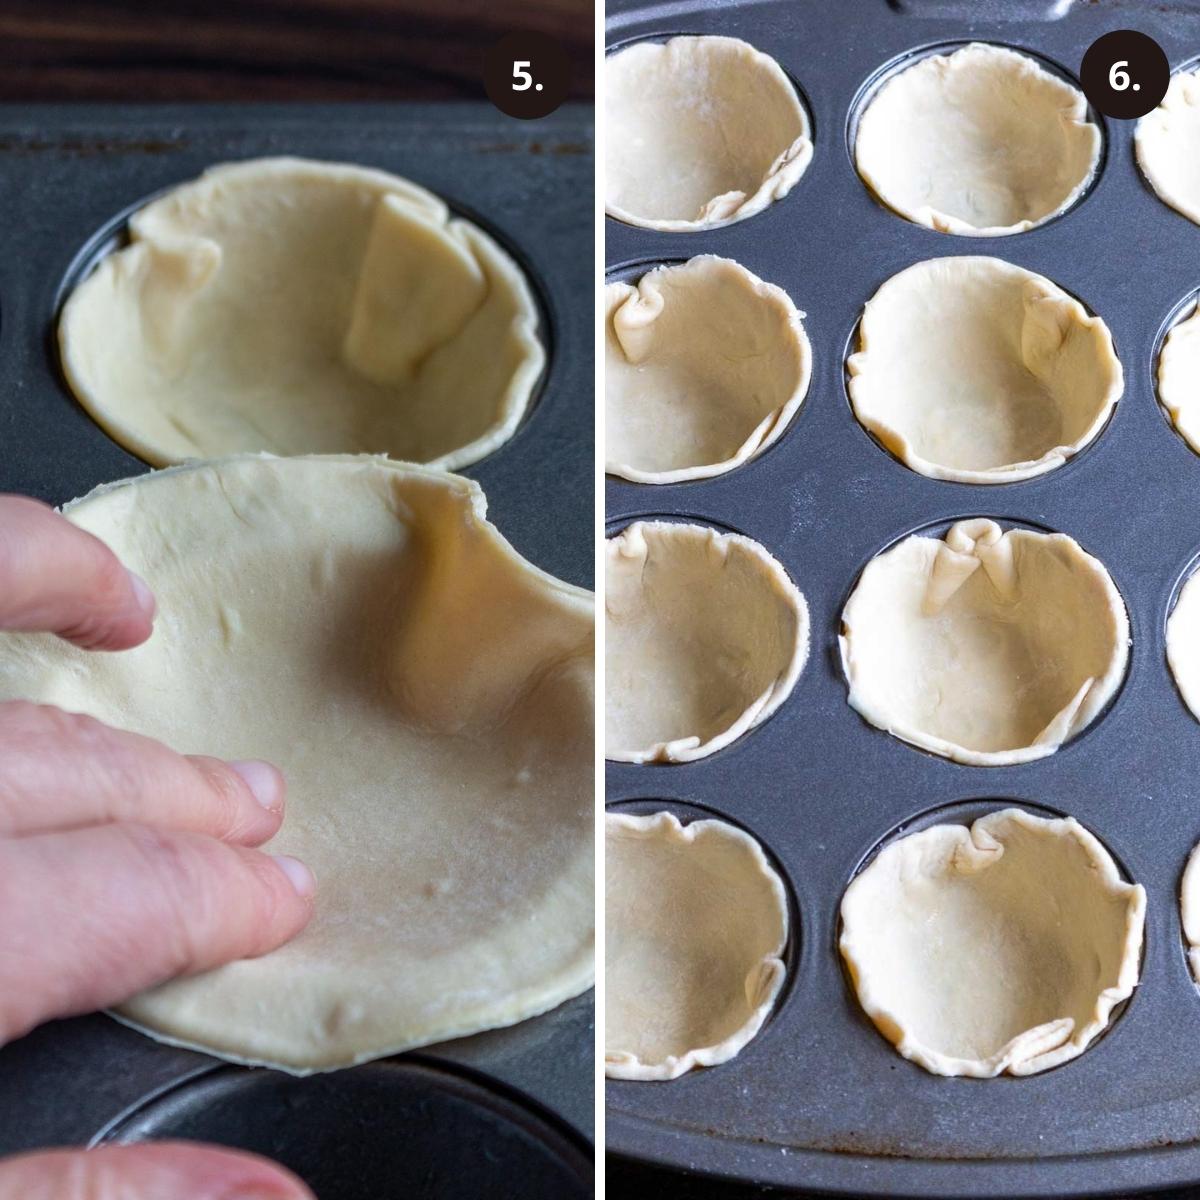 Placing round cut circle puff pasty in muffin tins.